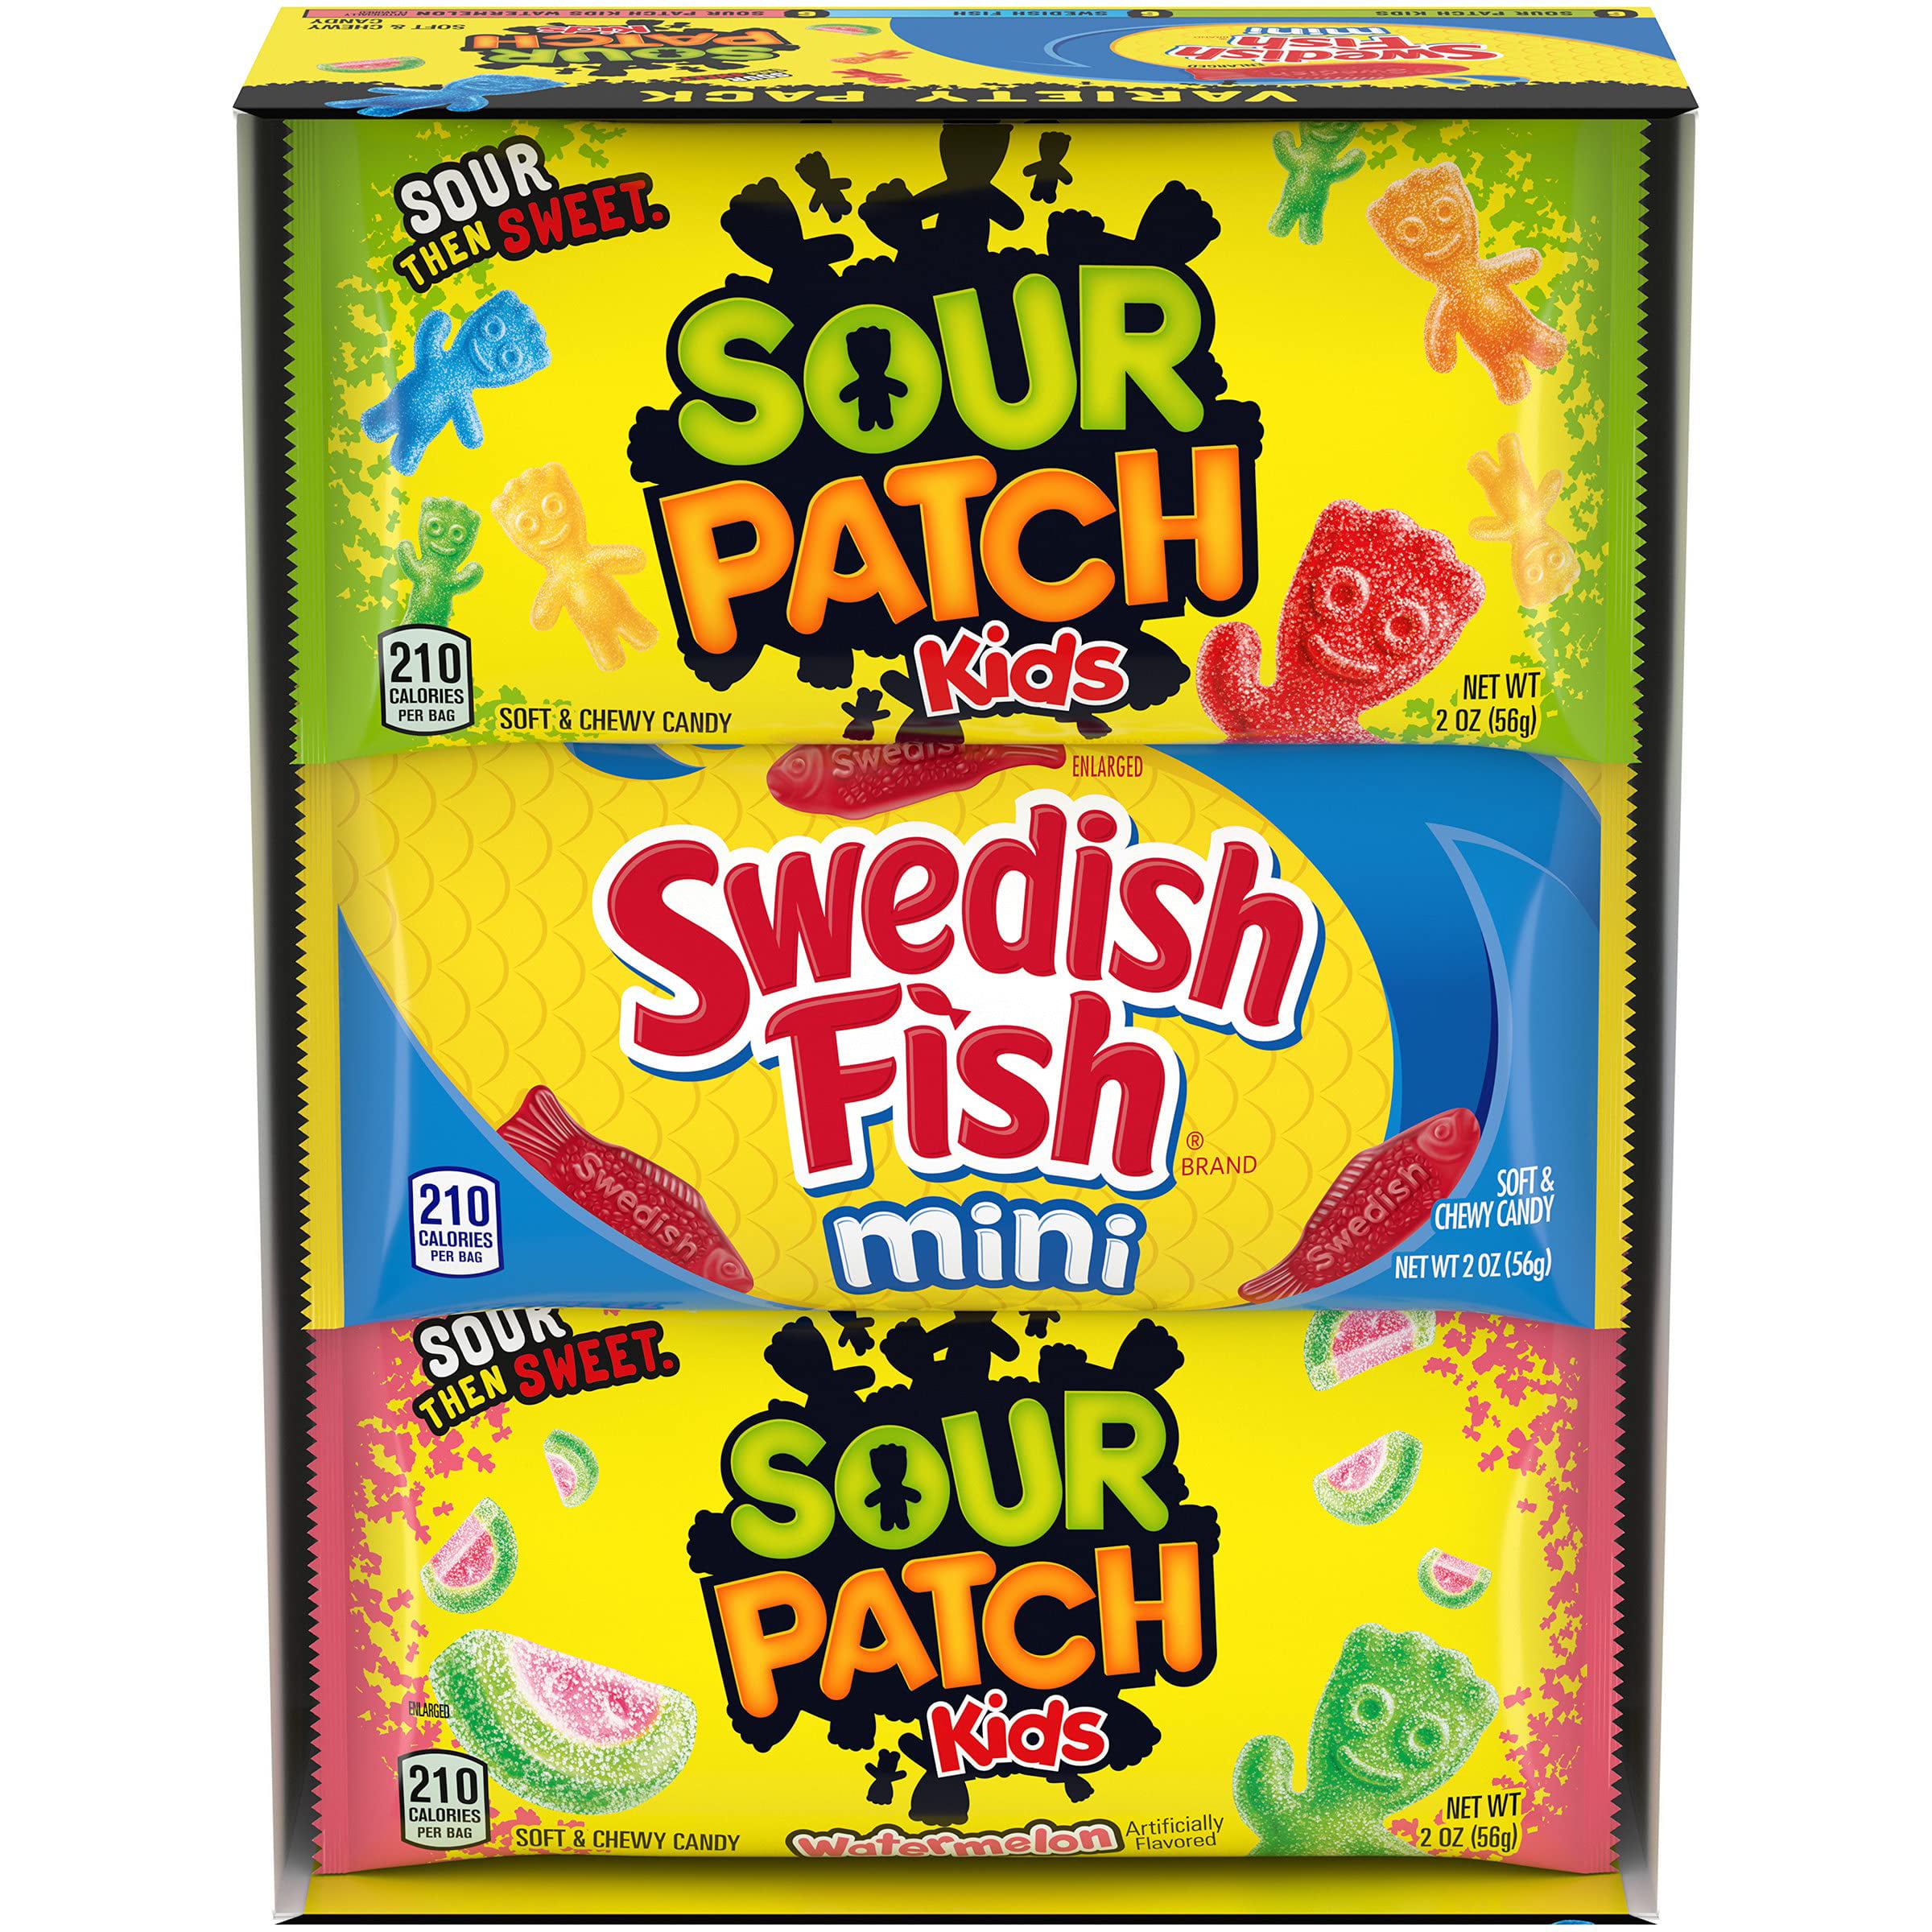 SOUR PATCH KIDS & SWEDISH FISH Soft & Chewy Candy Variety Pack, 18 Individual Snack Packs